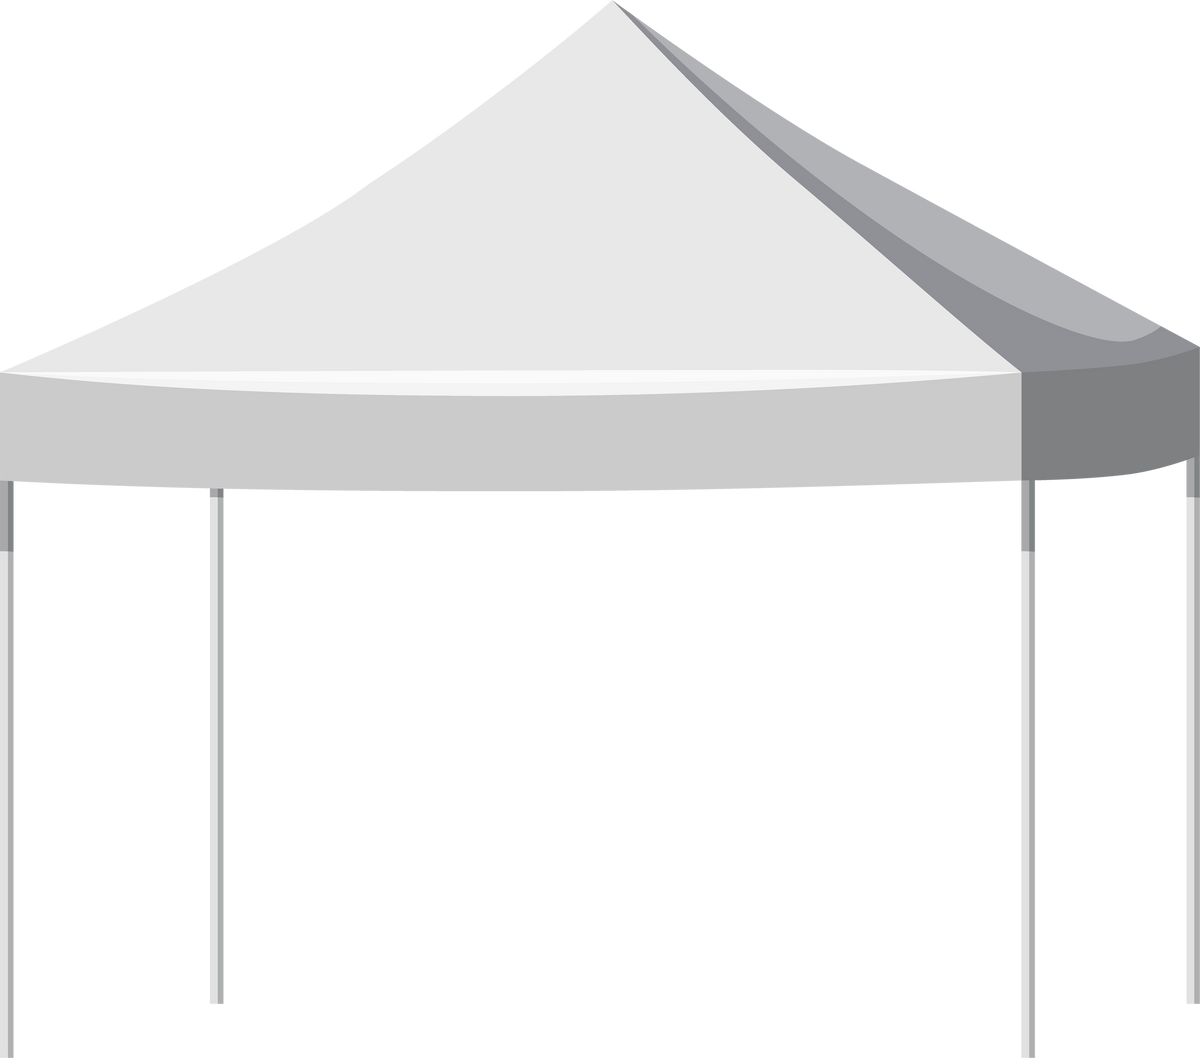 Tent template, canopy